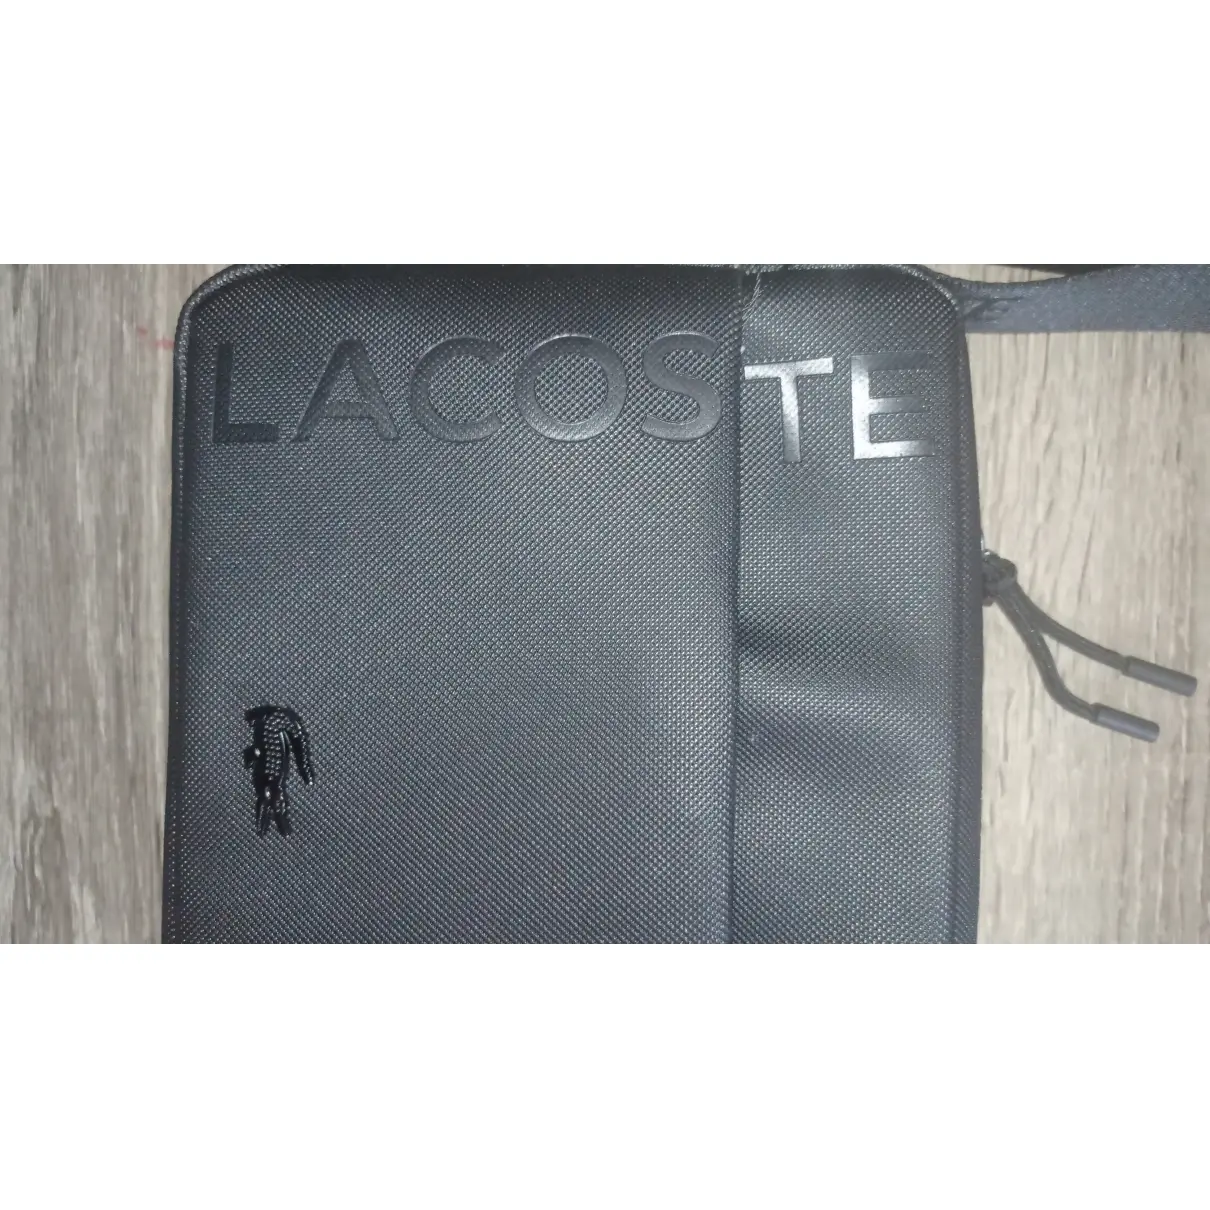 Leather bag Lacoste